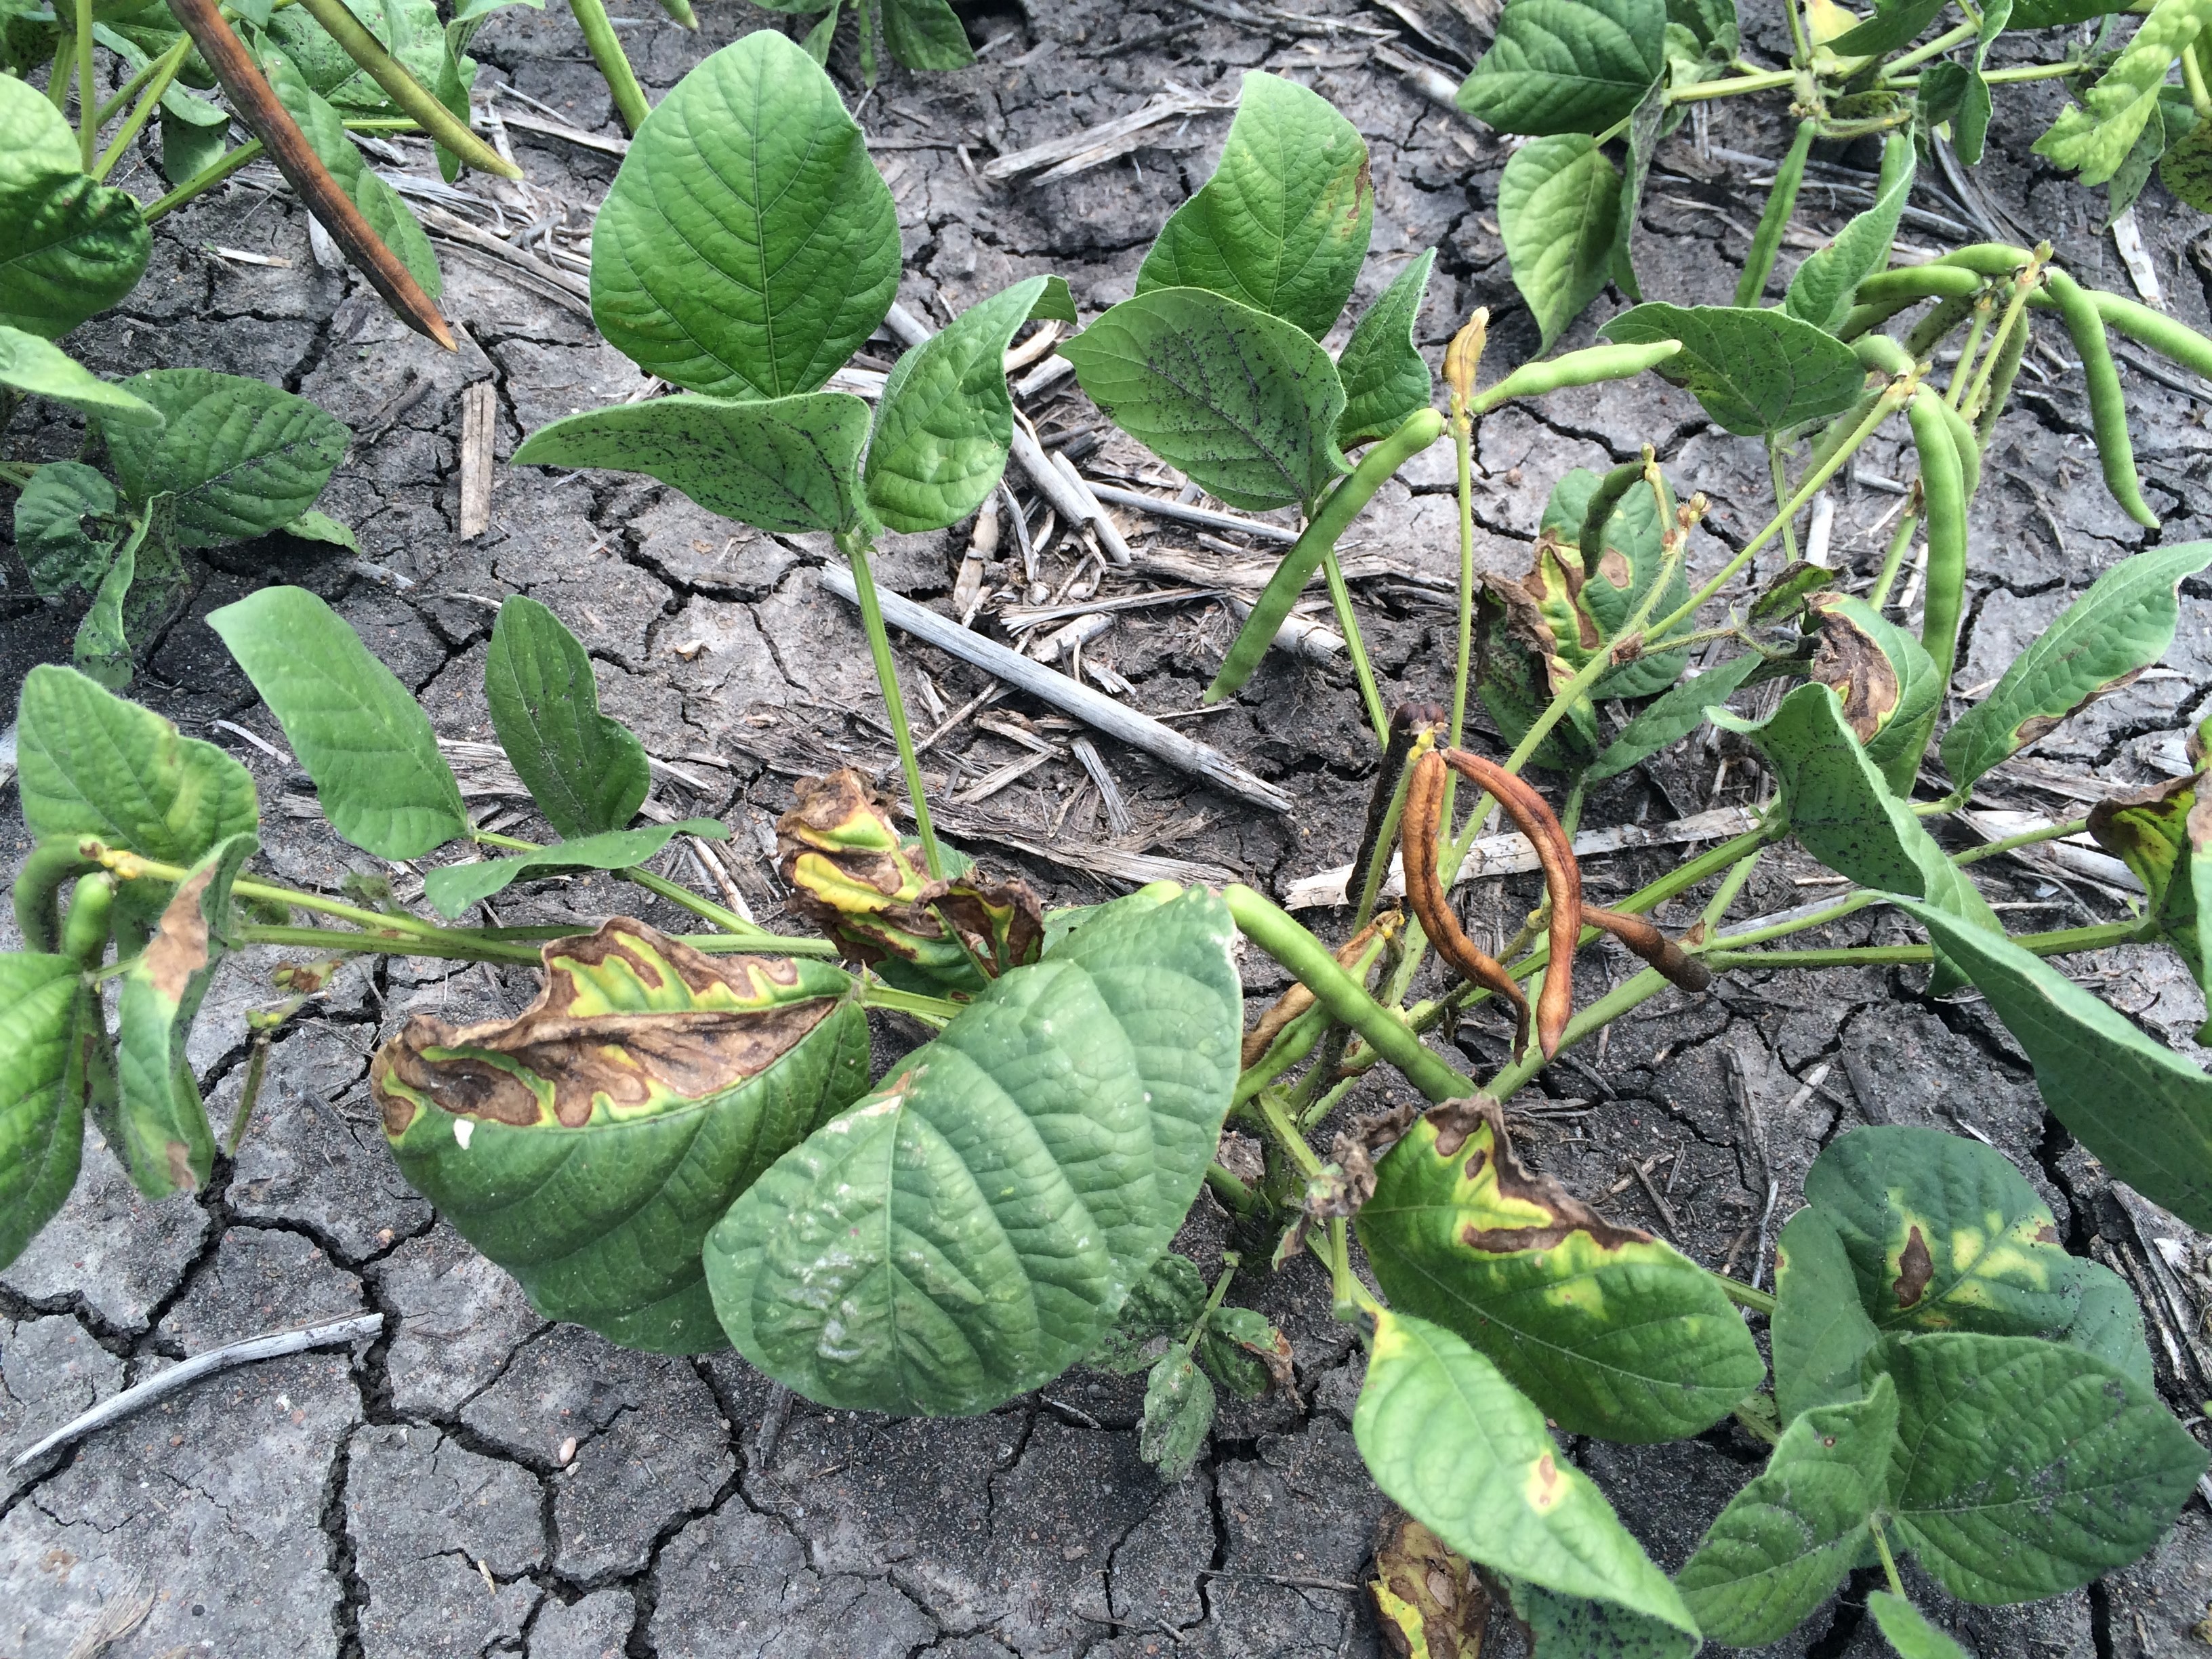 This photo shows the symptoms of tan spot on mungbean with large tan-coloured interveinal necrotic lesions on leaves. Note that younger lesions are surrounded by a distinct yellow margin whereas the margin is less noticeable in older lesions.